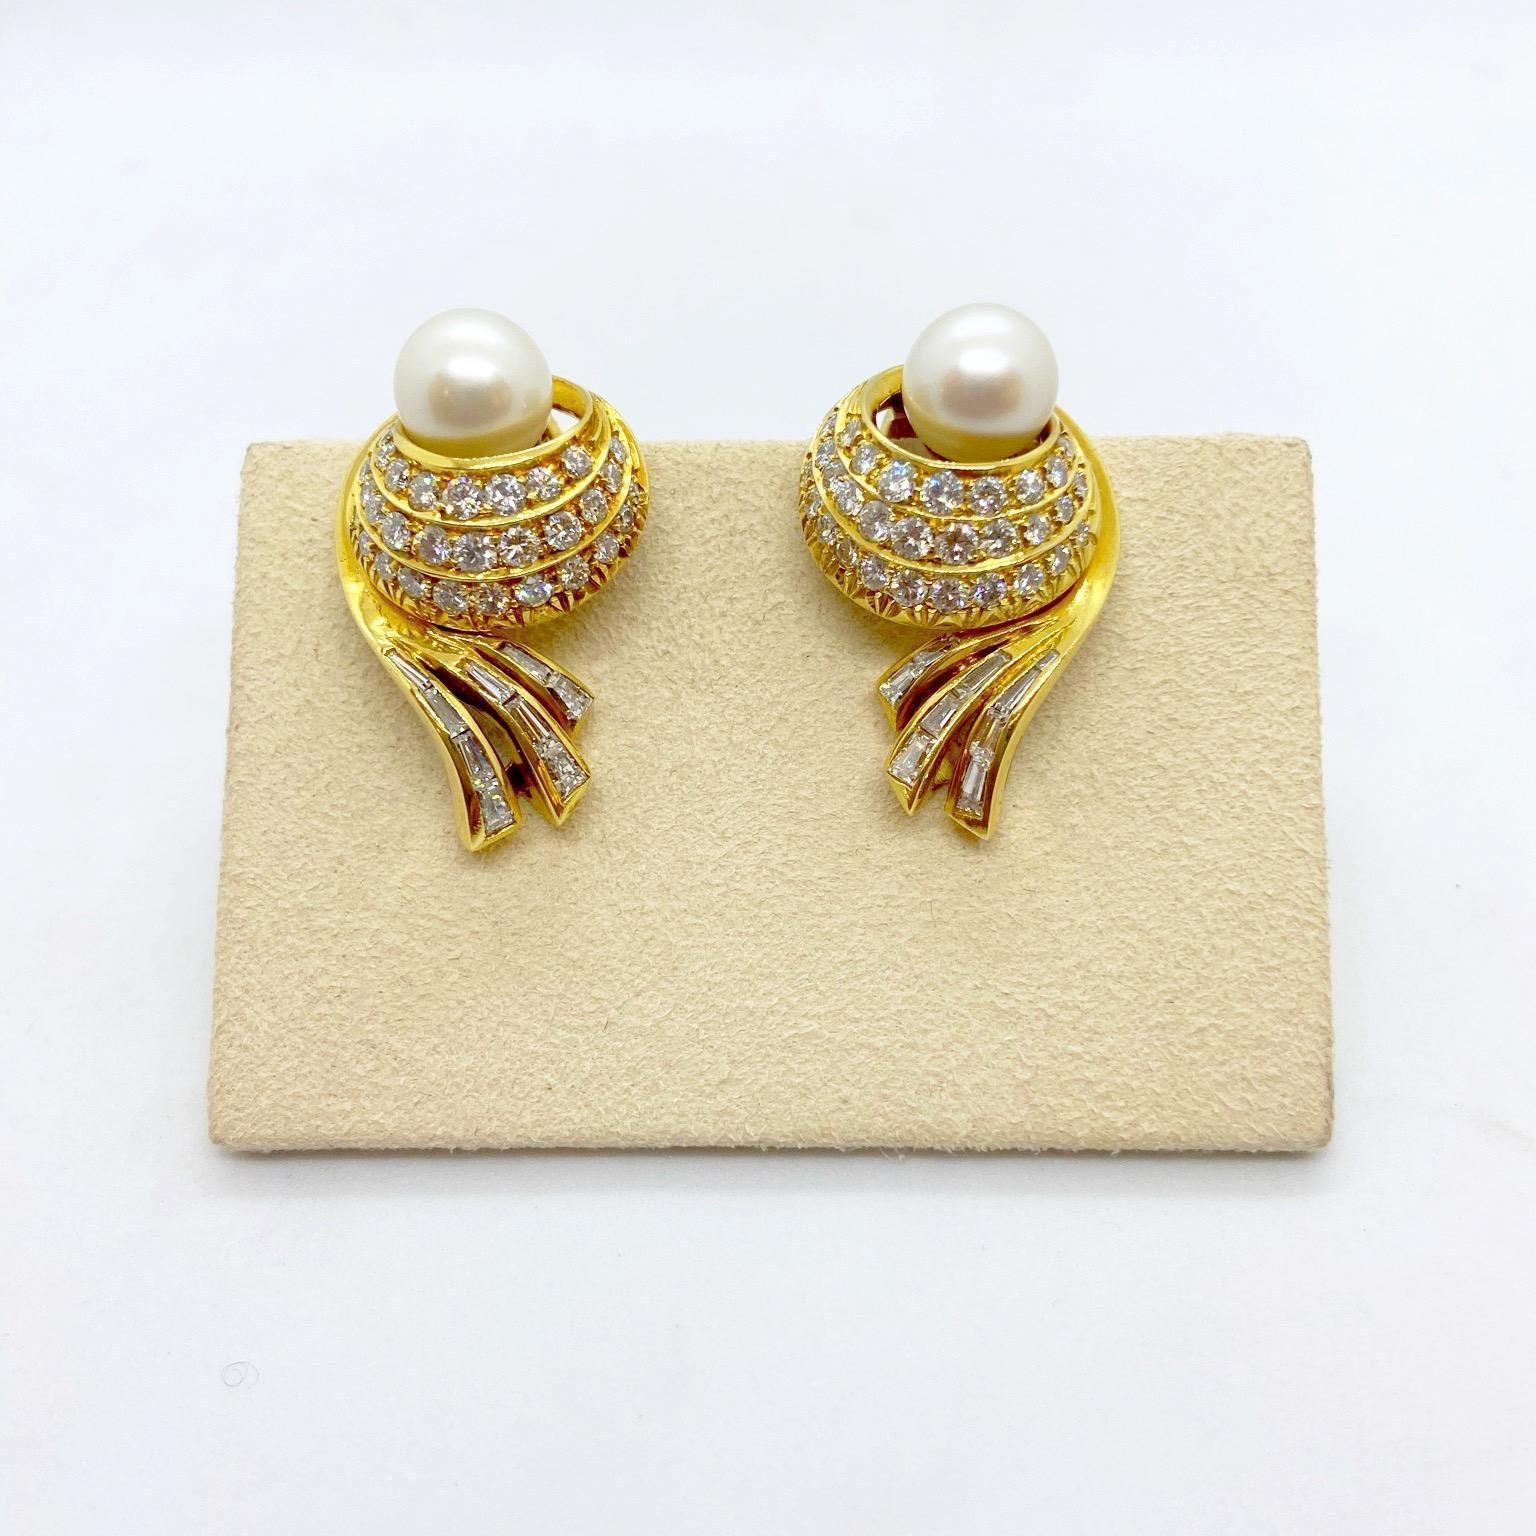 Retro Cellini NYC 18 Karat Gold, Swirl Earrings with 4.06 Carat Diamonds and Pearls For Sale